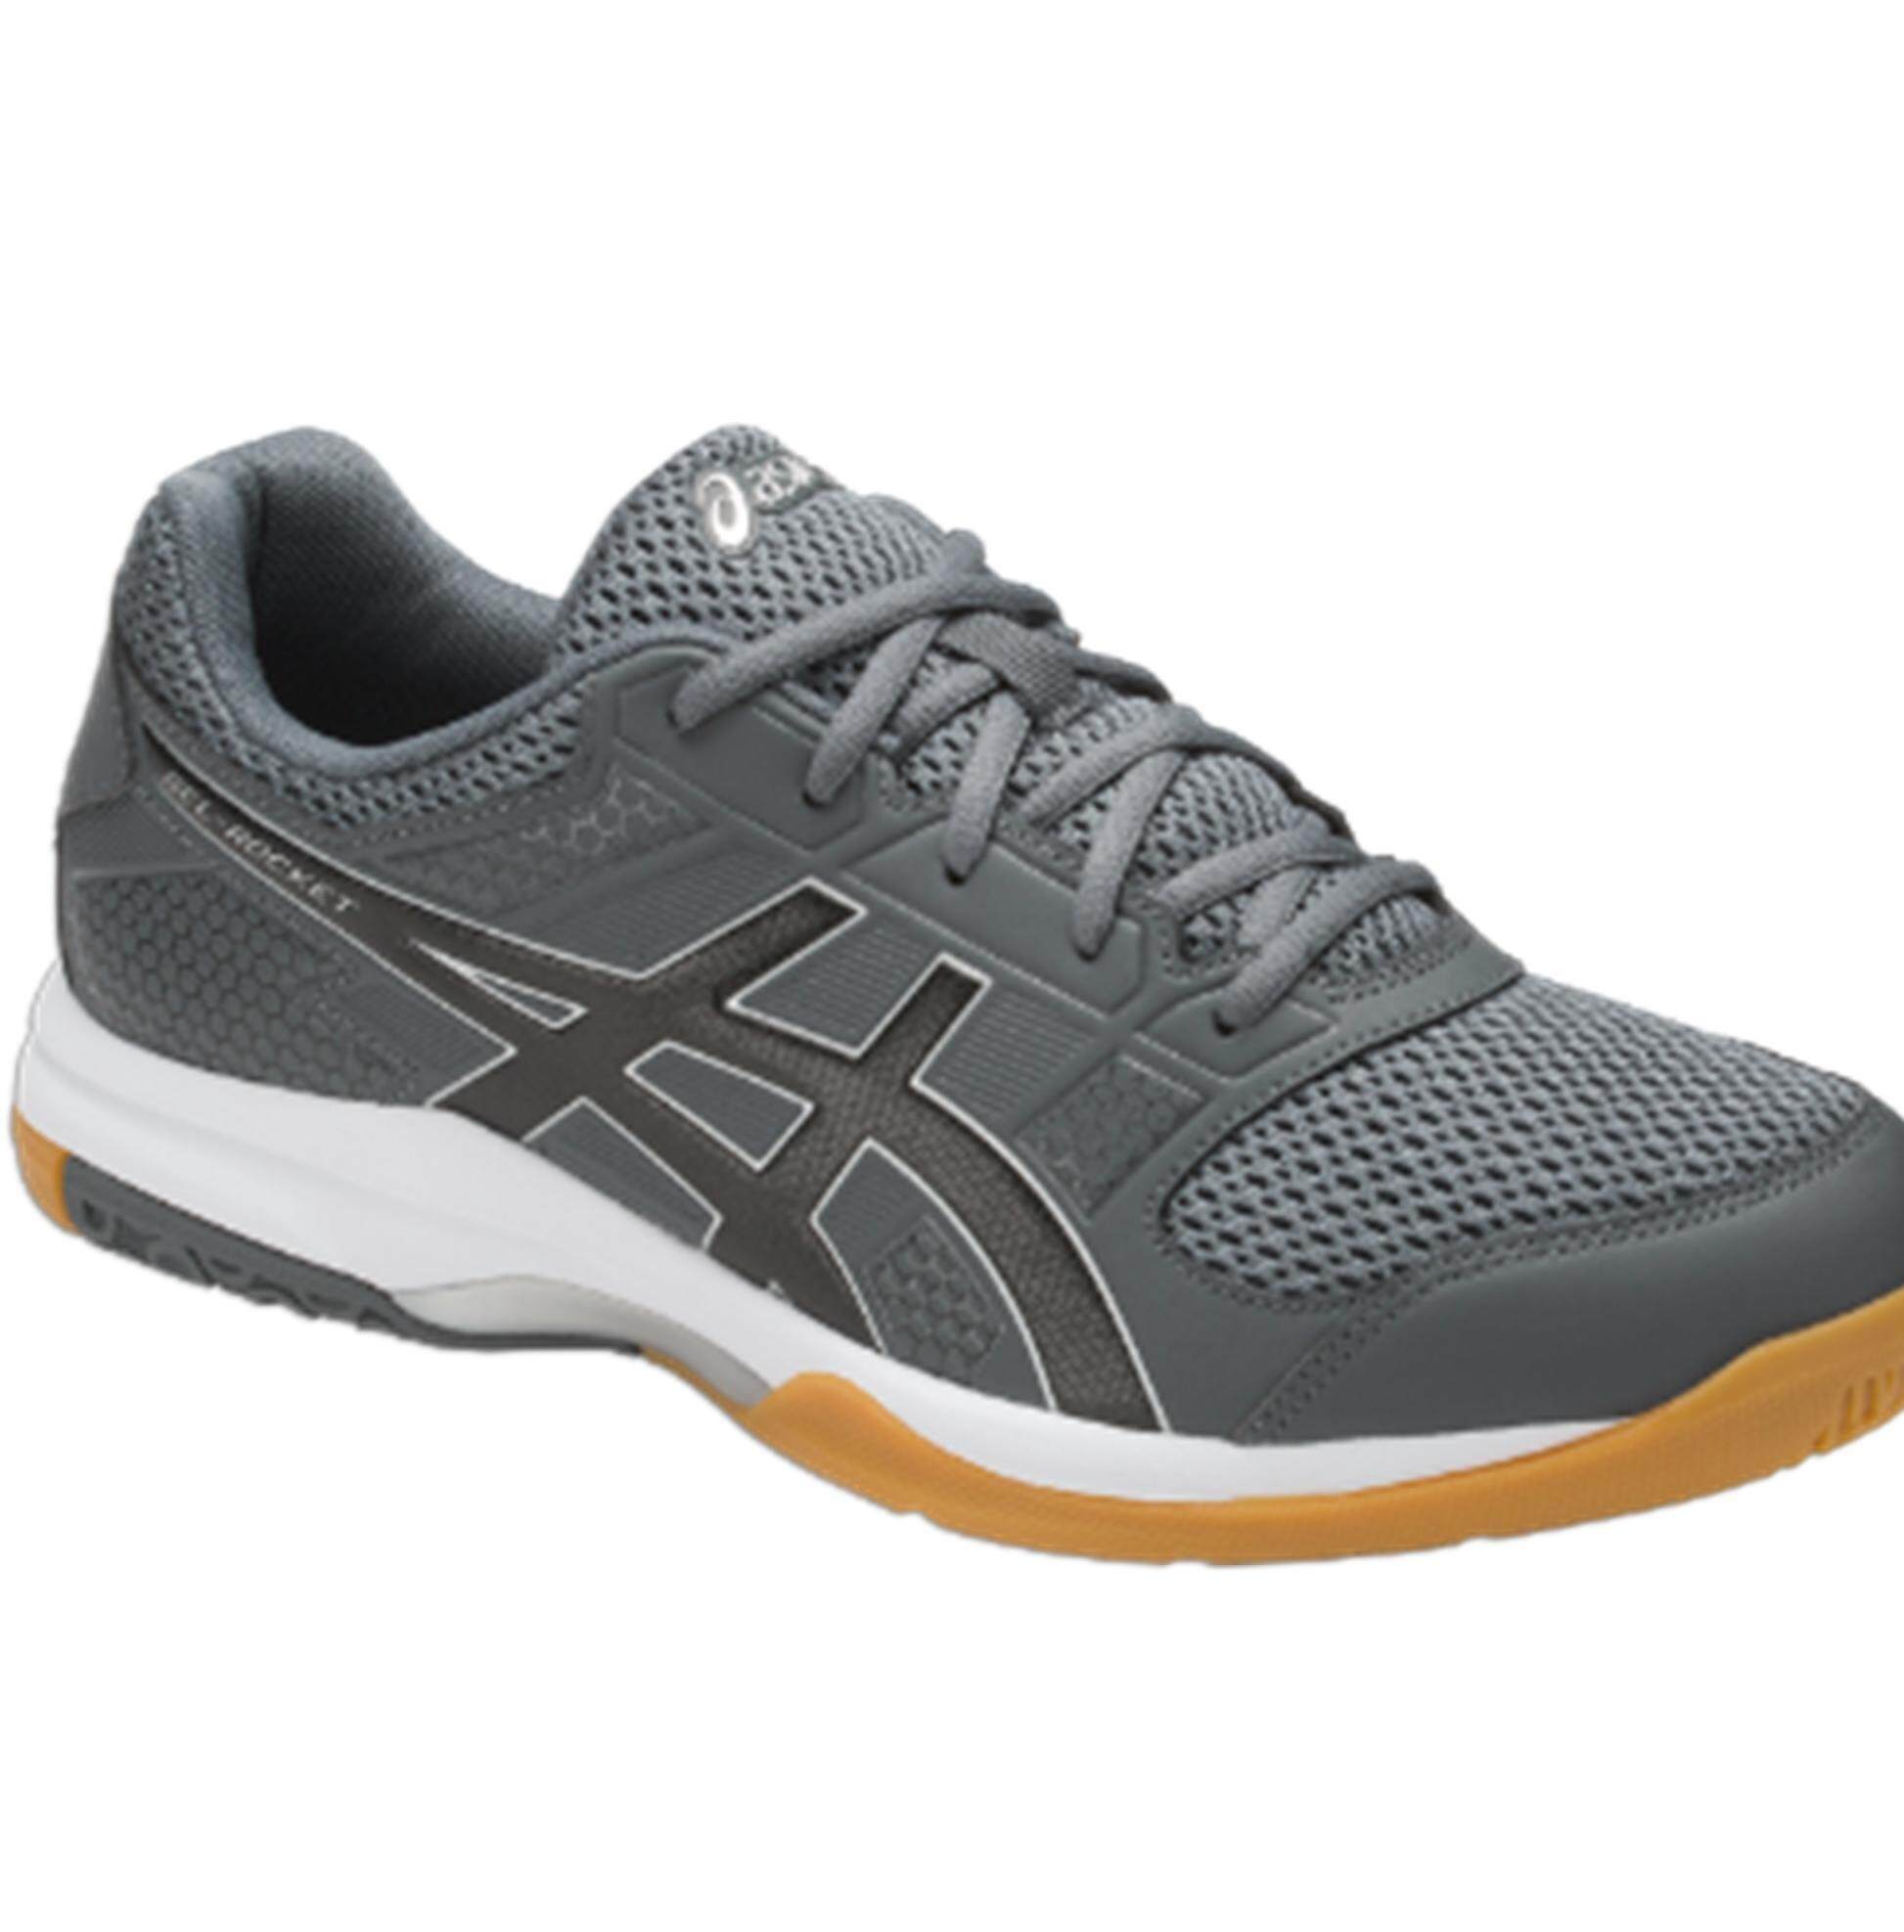 asics badminton shoes price in malaysia